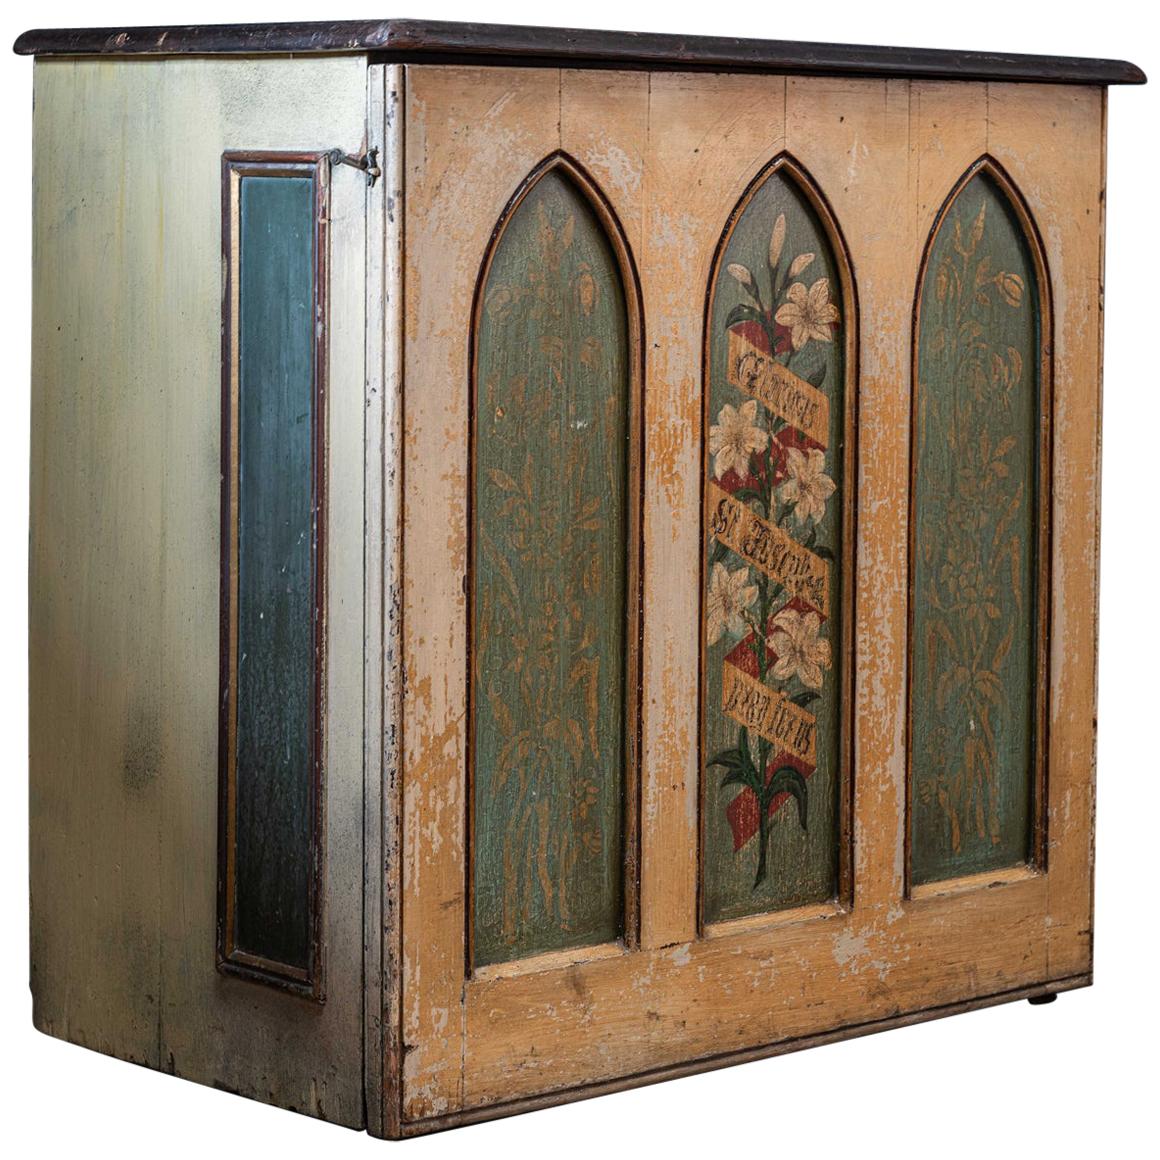 English 19th Century Decorative Painted Chapel Cupboard